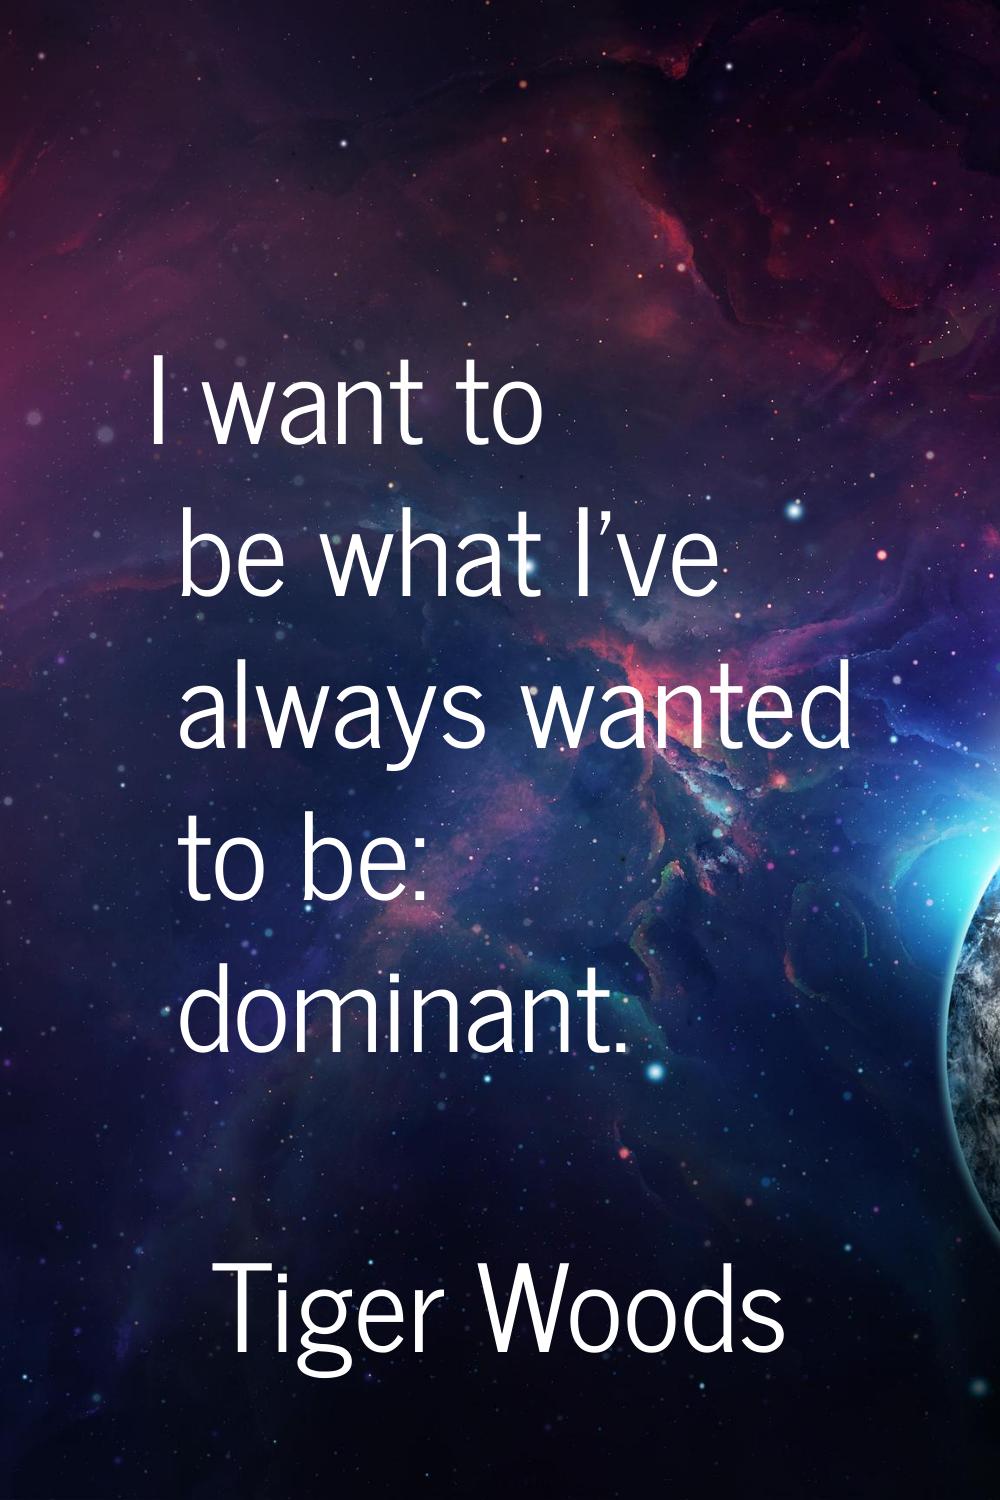 I want to be what I've always wanted to be: dominant.